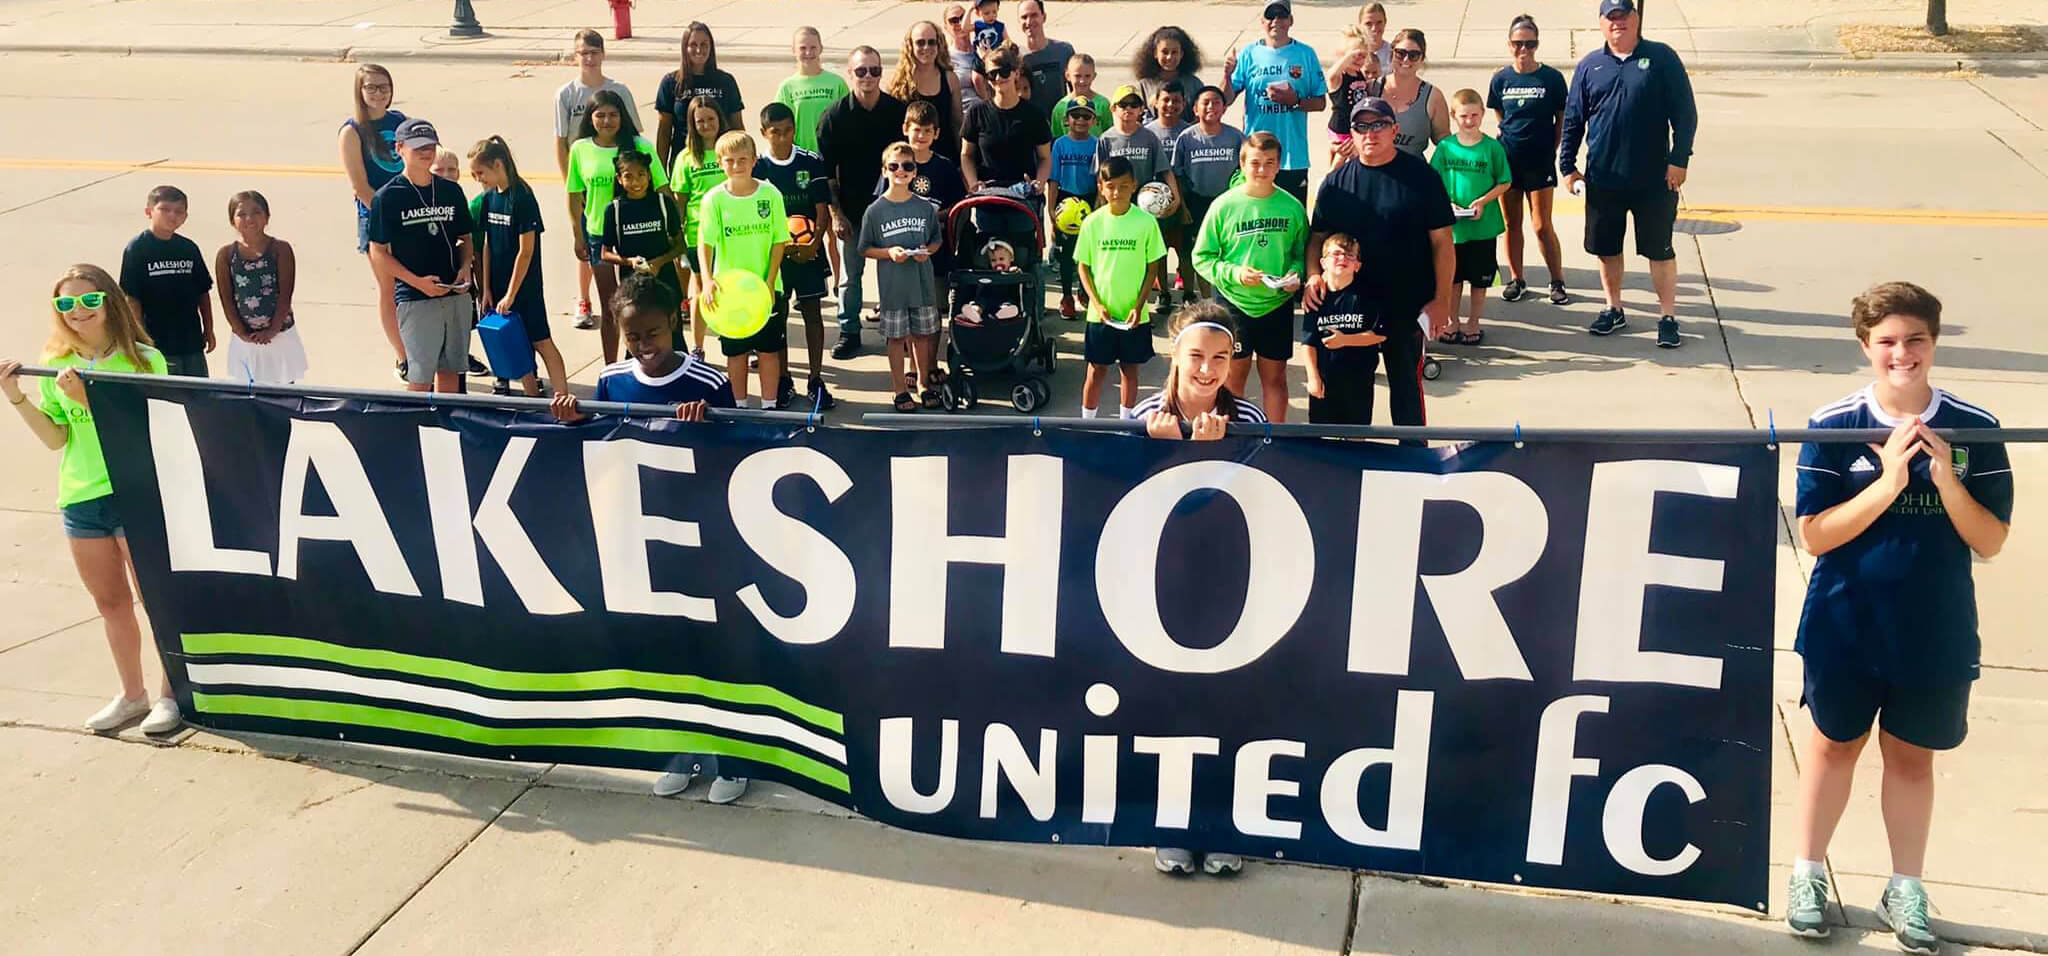 Join Us in the Brat Days Parade! Lakeshore United FC